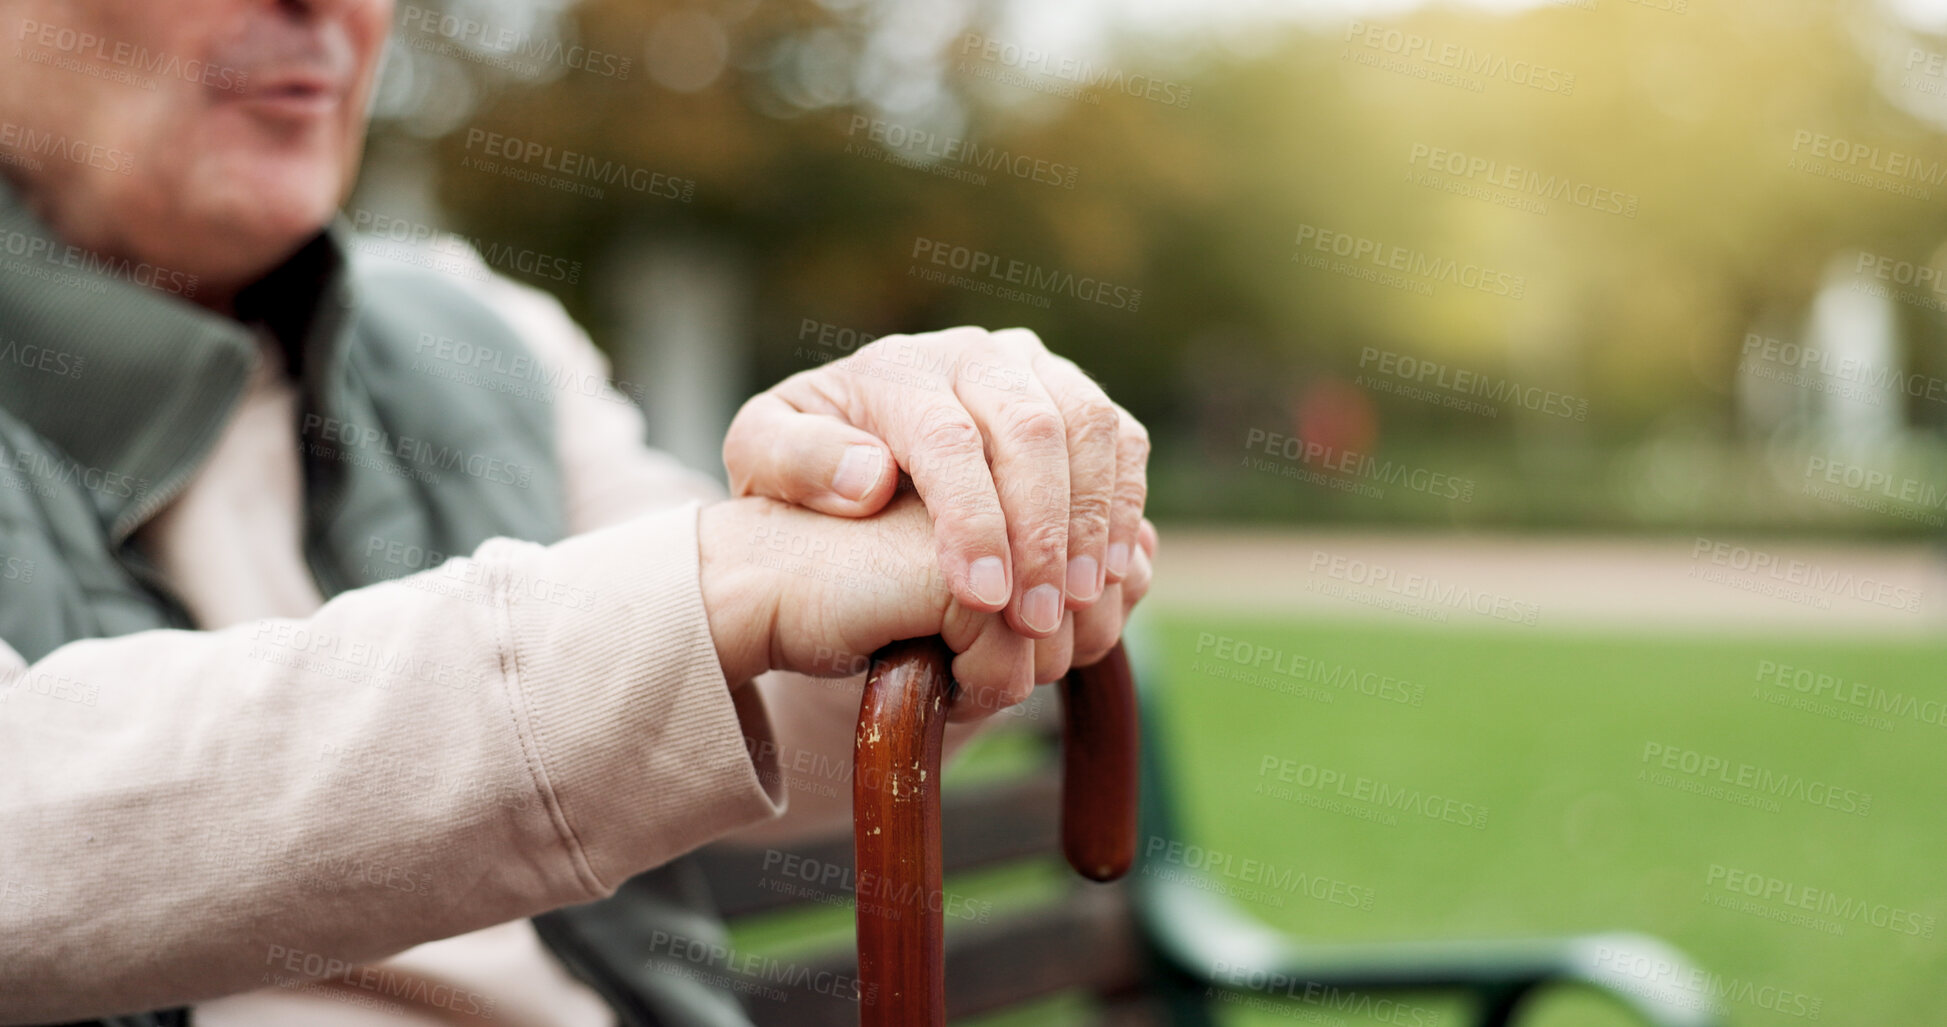 Buy stock photo Hands, cane and elderly man in nature for walking for fresh air, exercise or peace in a park. Environment, closeup and senior male person in retirement with a stick for support in outdoor garden.